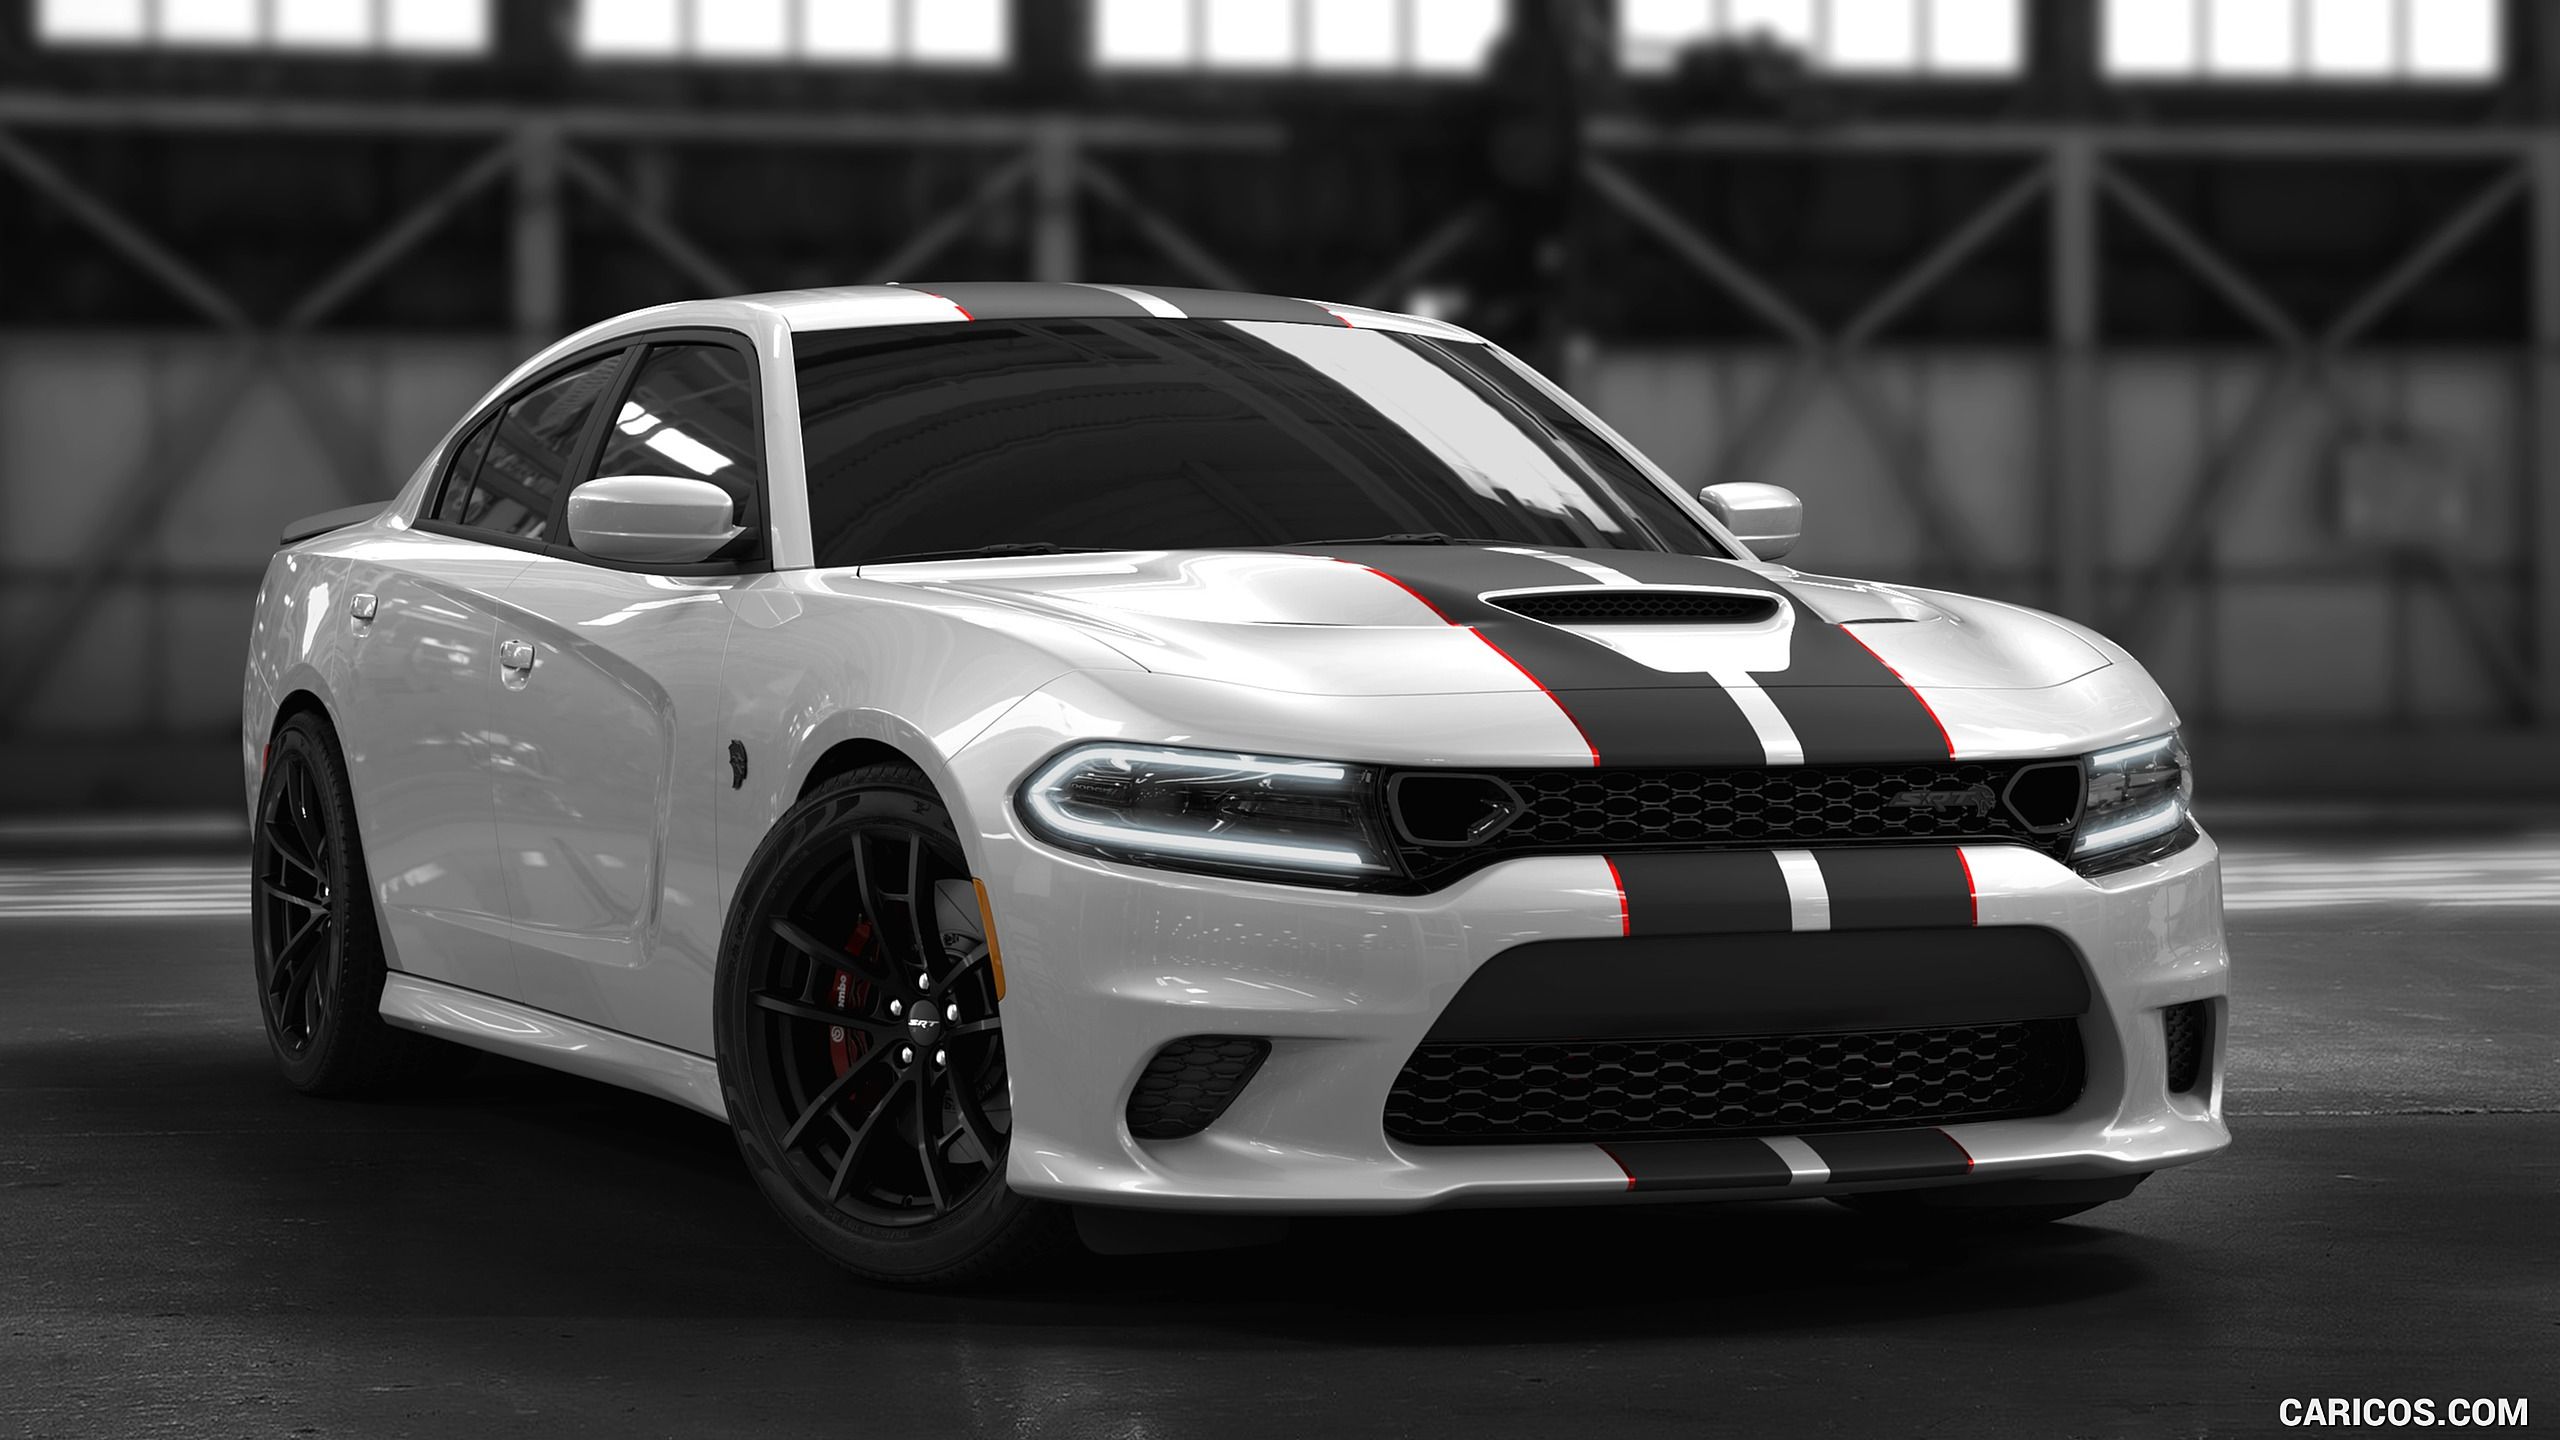 Dodge Charger Hellcat Wallpapers